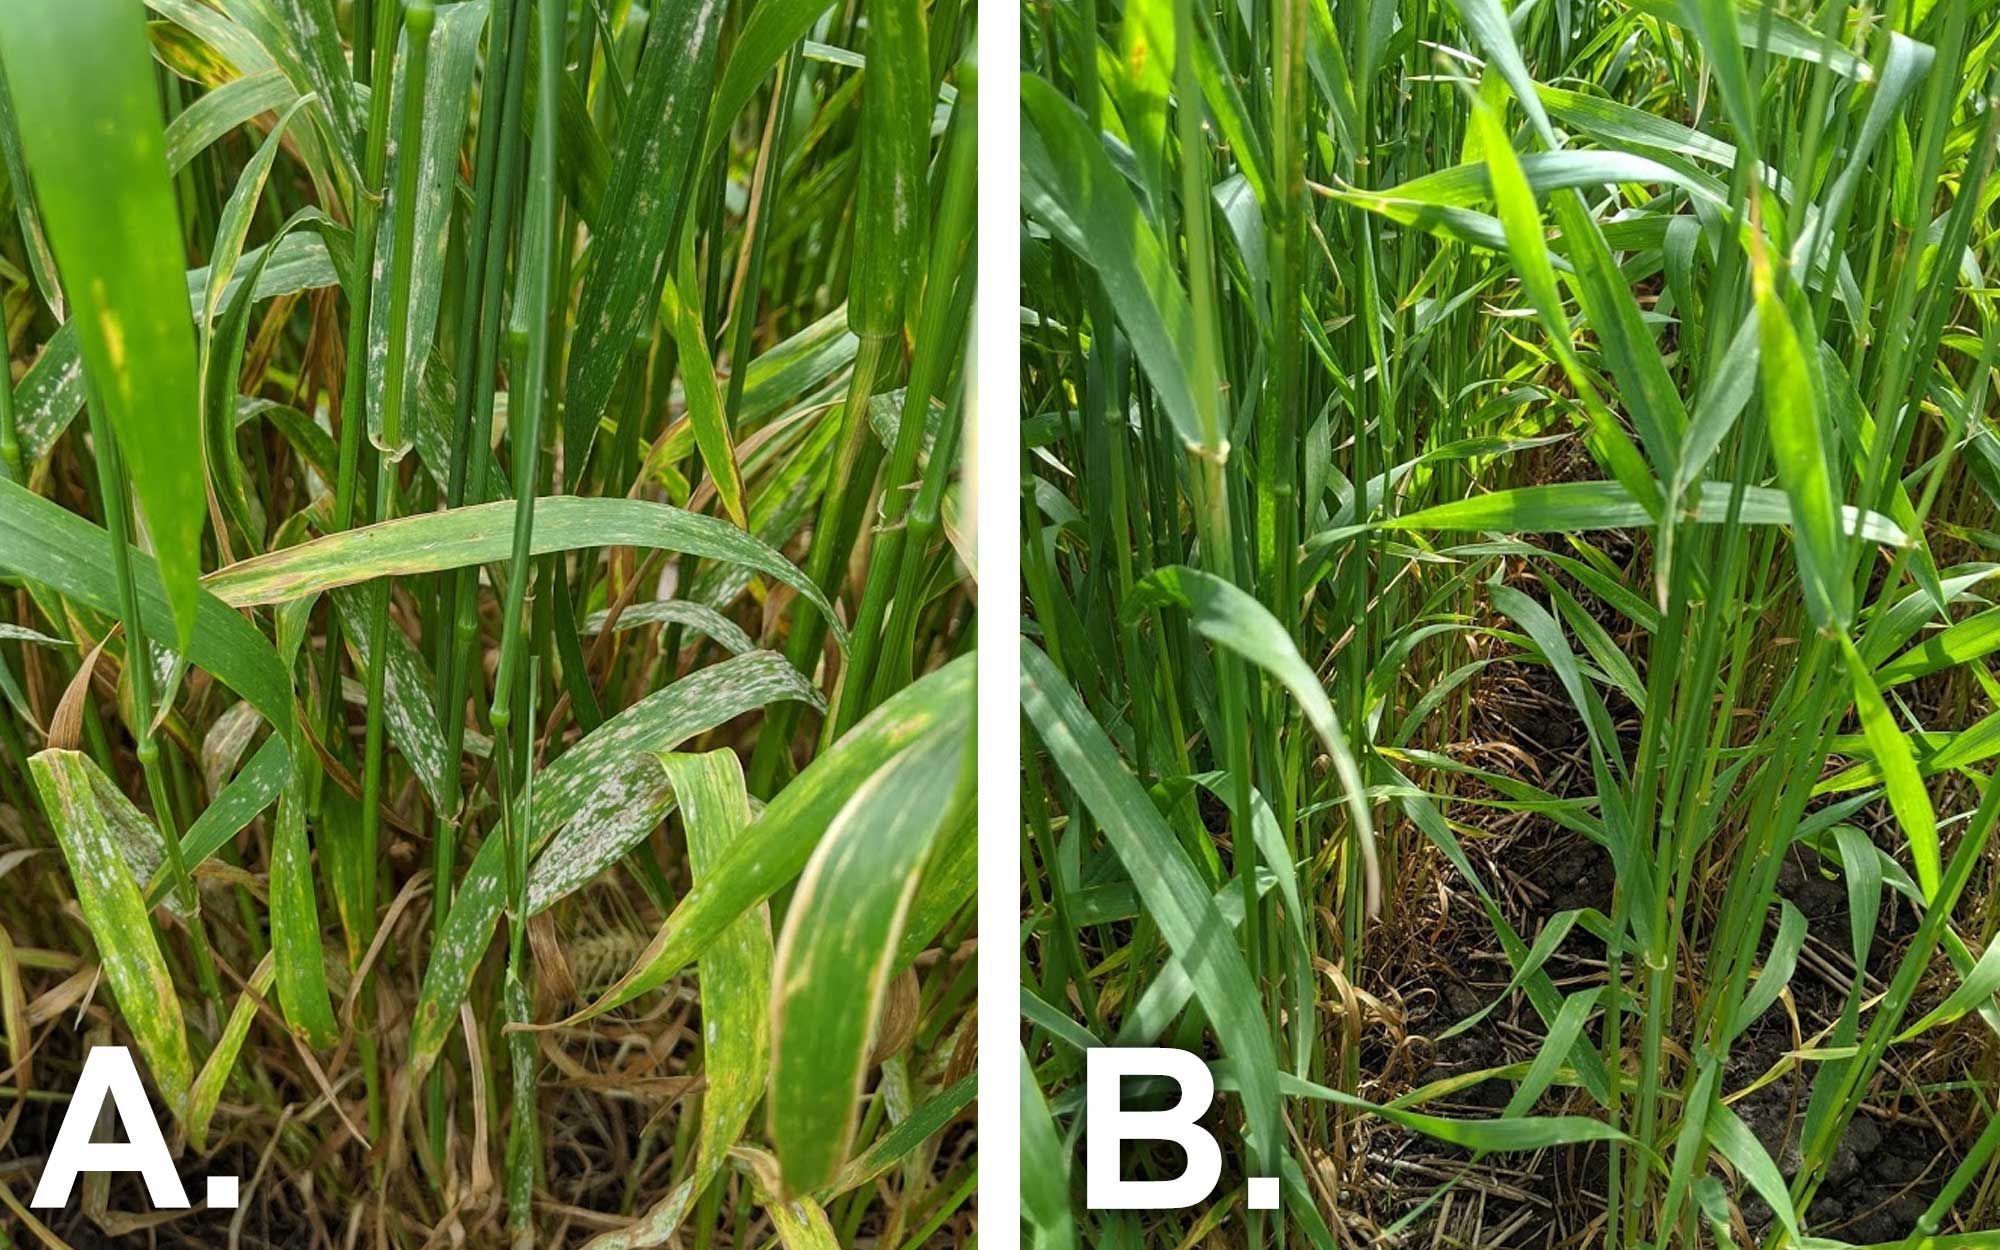 Two pictures of winter wheat; left picture of susceptible wheat with powdery mildew symptoms and right picture of resistant wheat without powdery mildew symptoms.